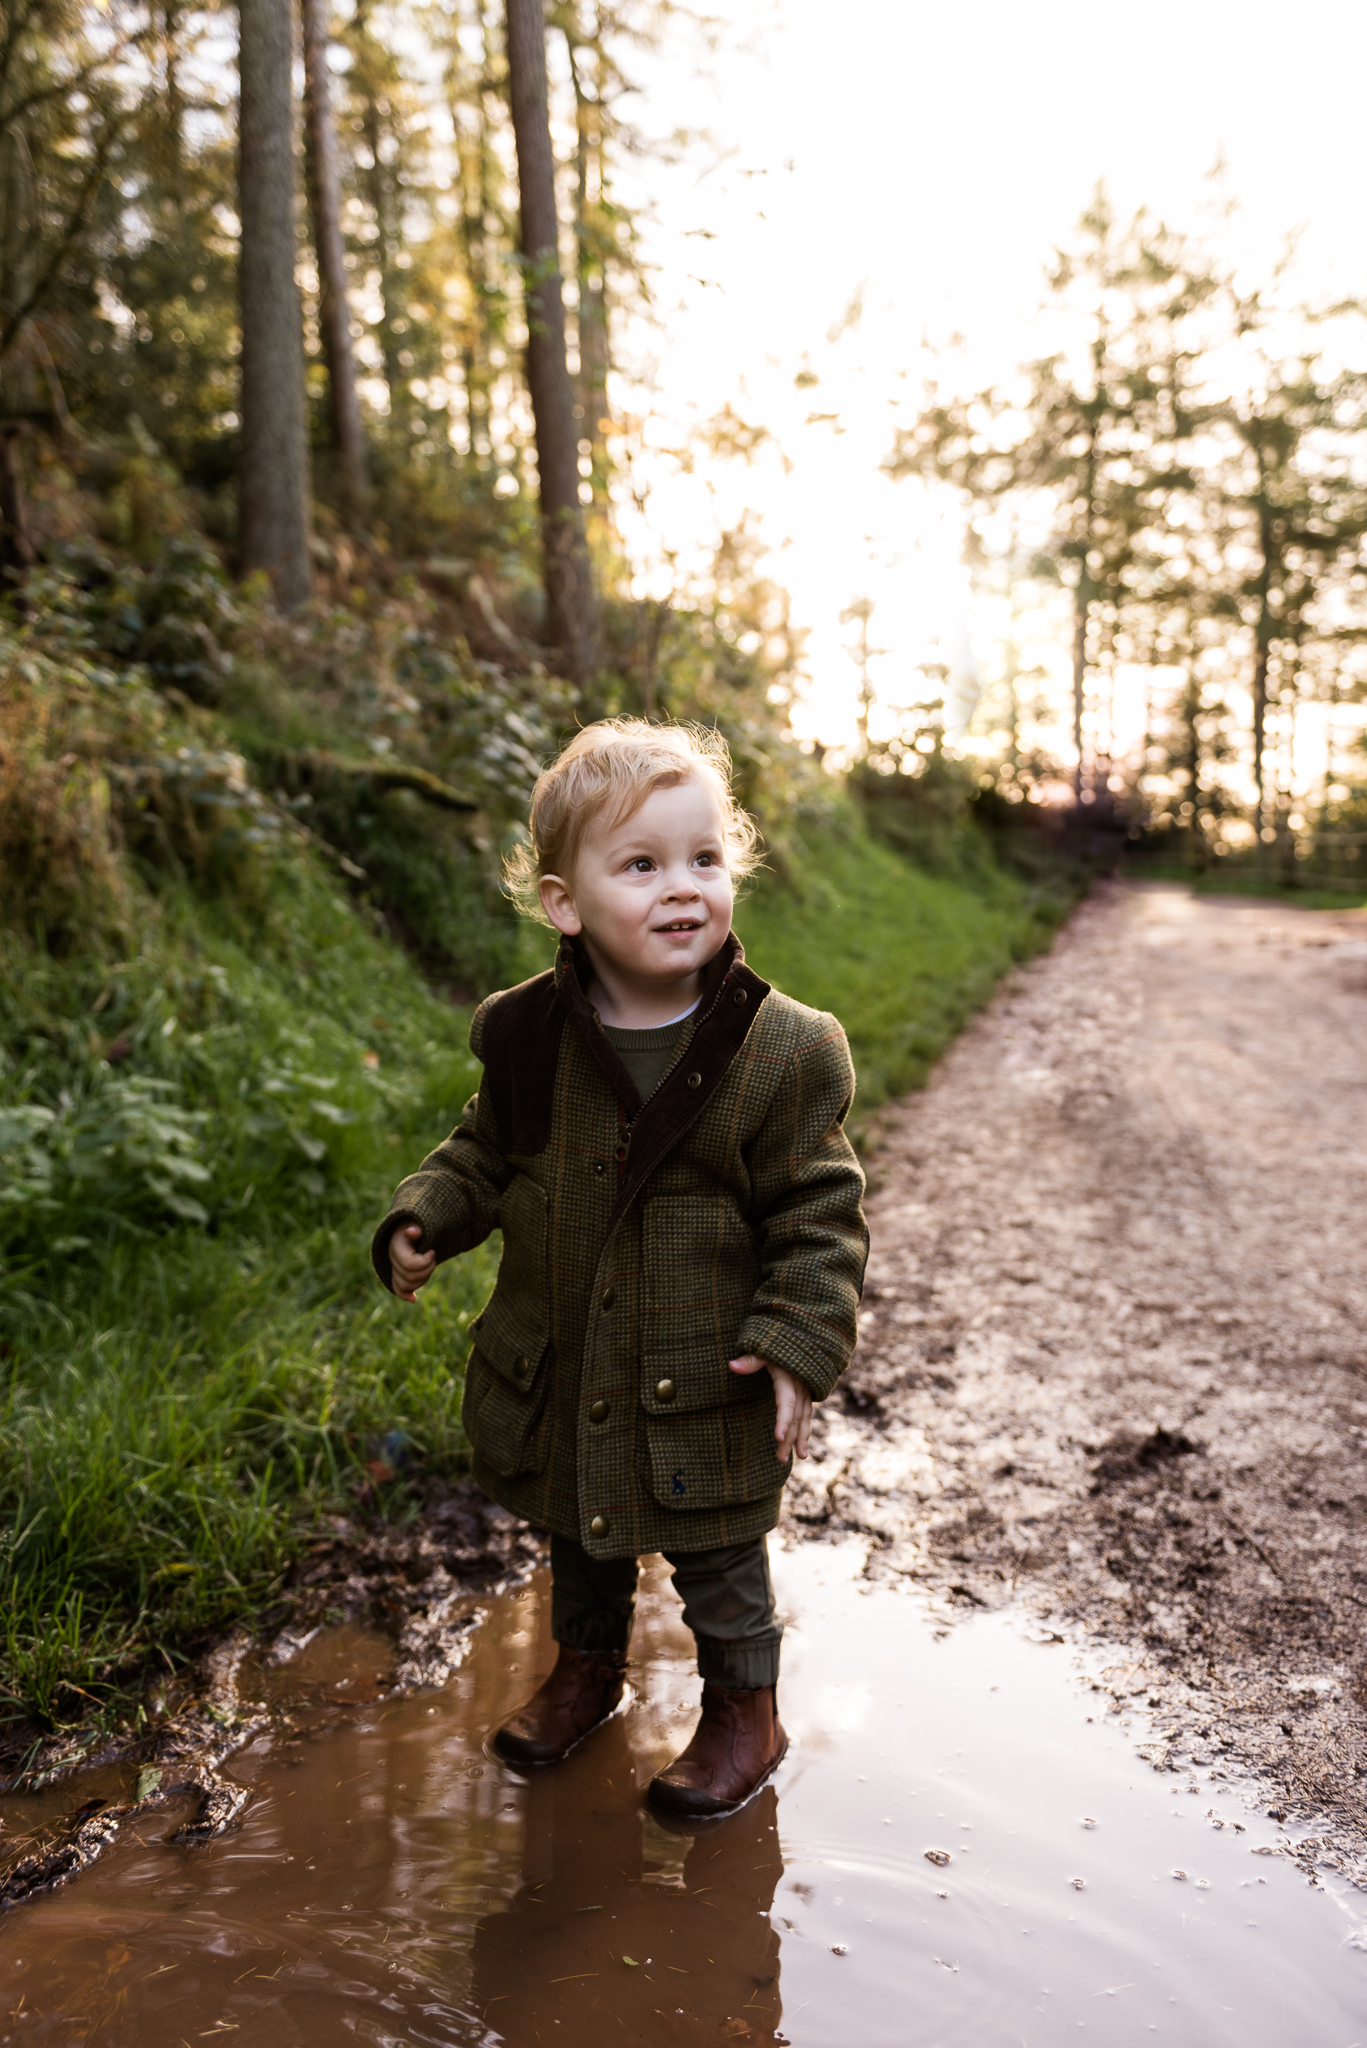 Autumn Documentary Lifestyle Family Photography at Clent Hills, Worcestershire Country Park countryside outdoors nature - Jenny Harper-20.jpg